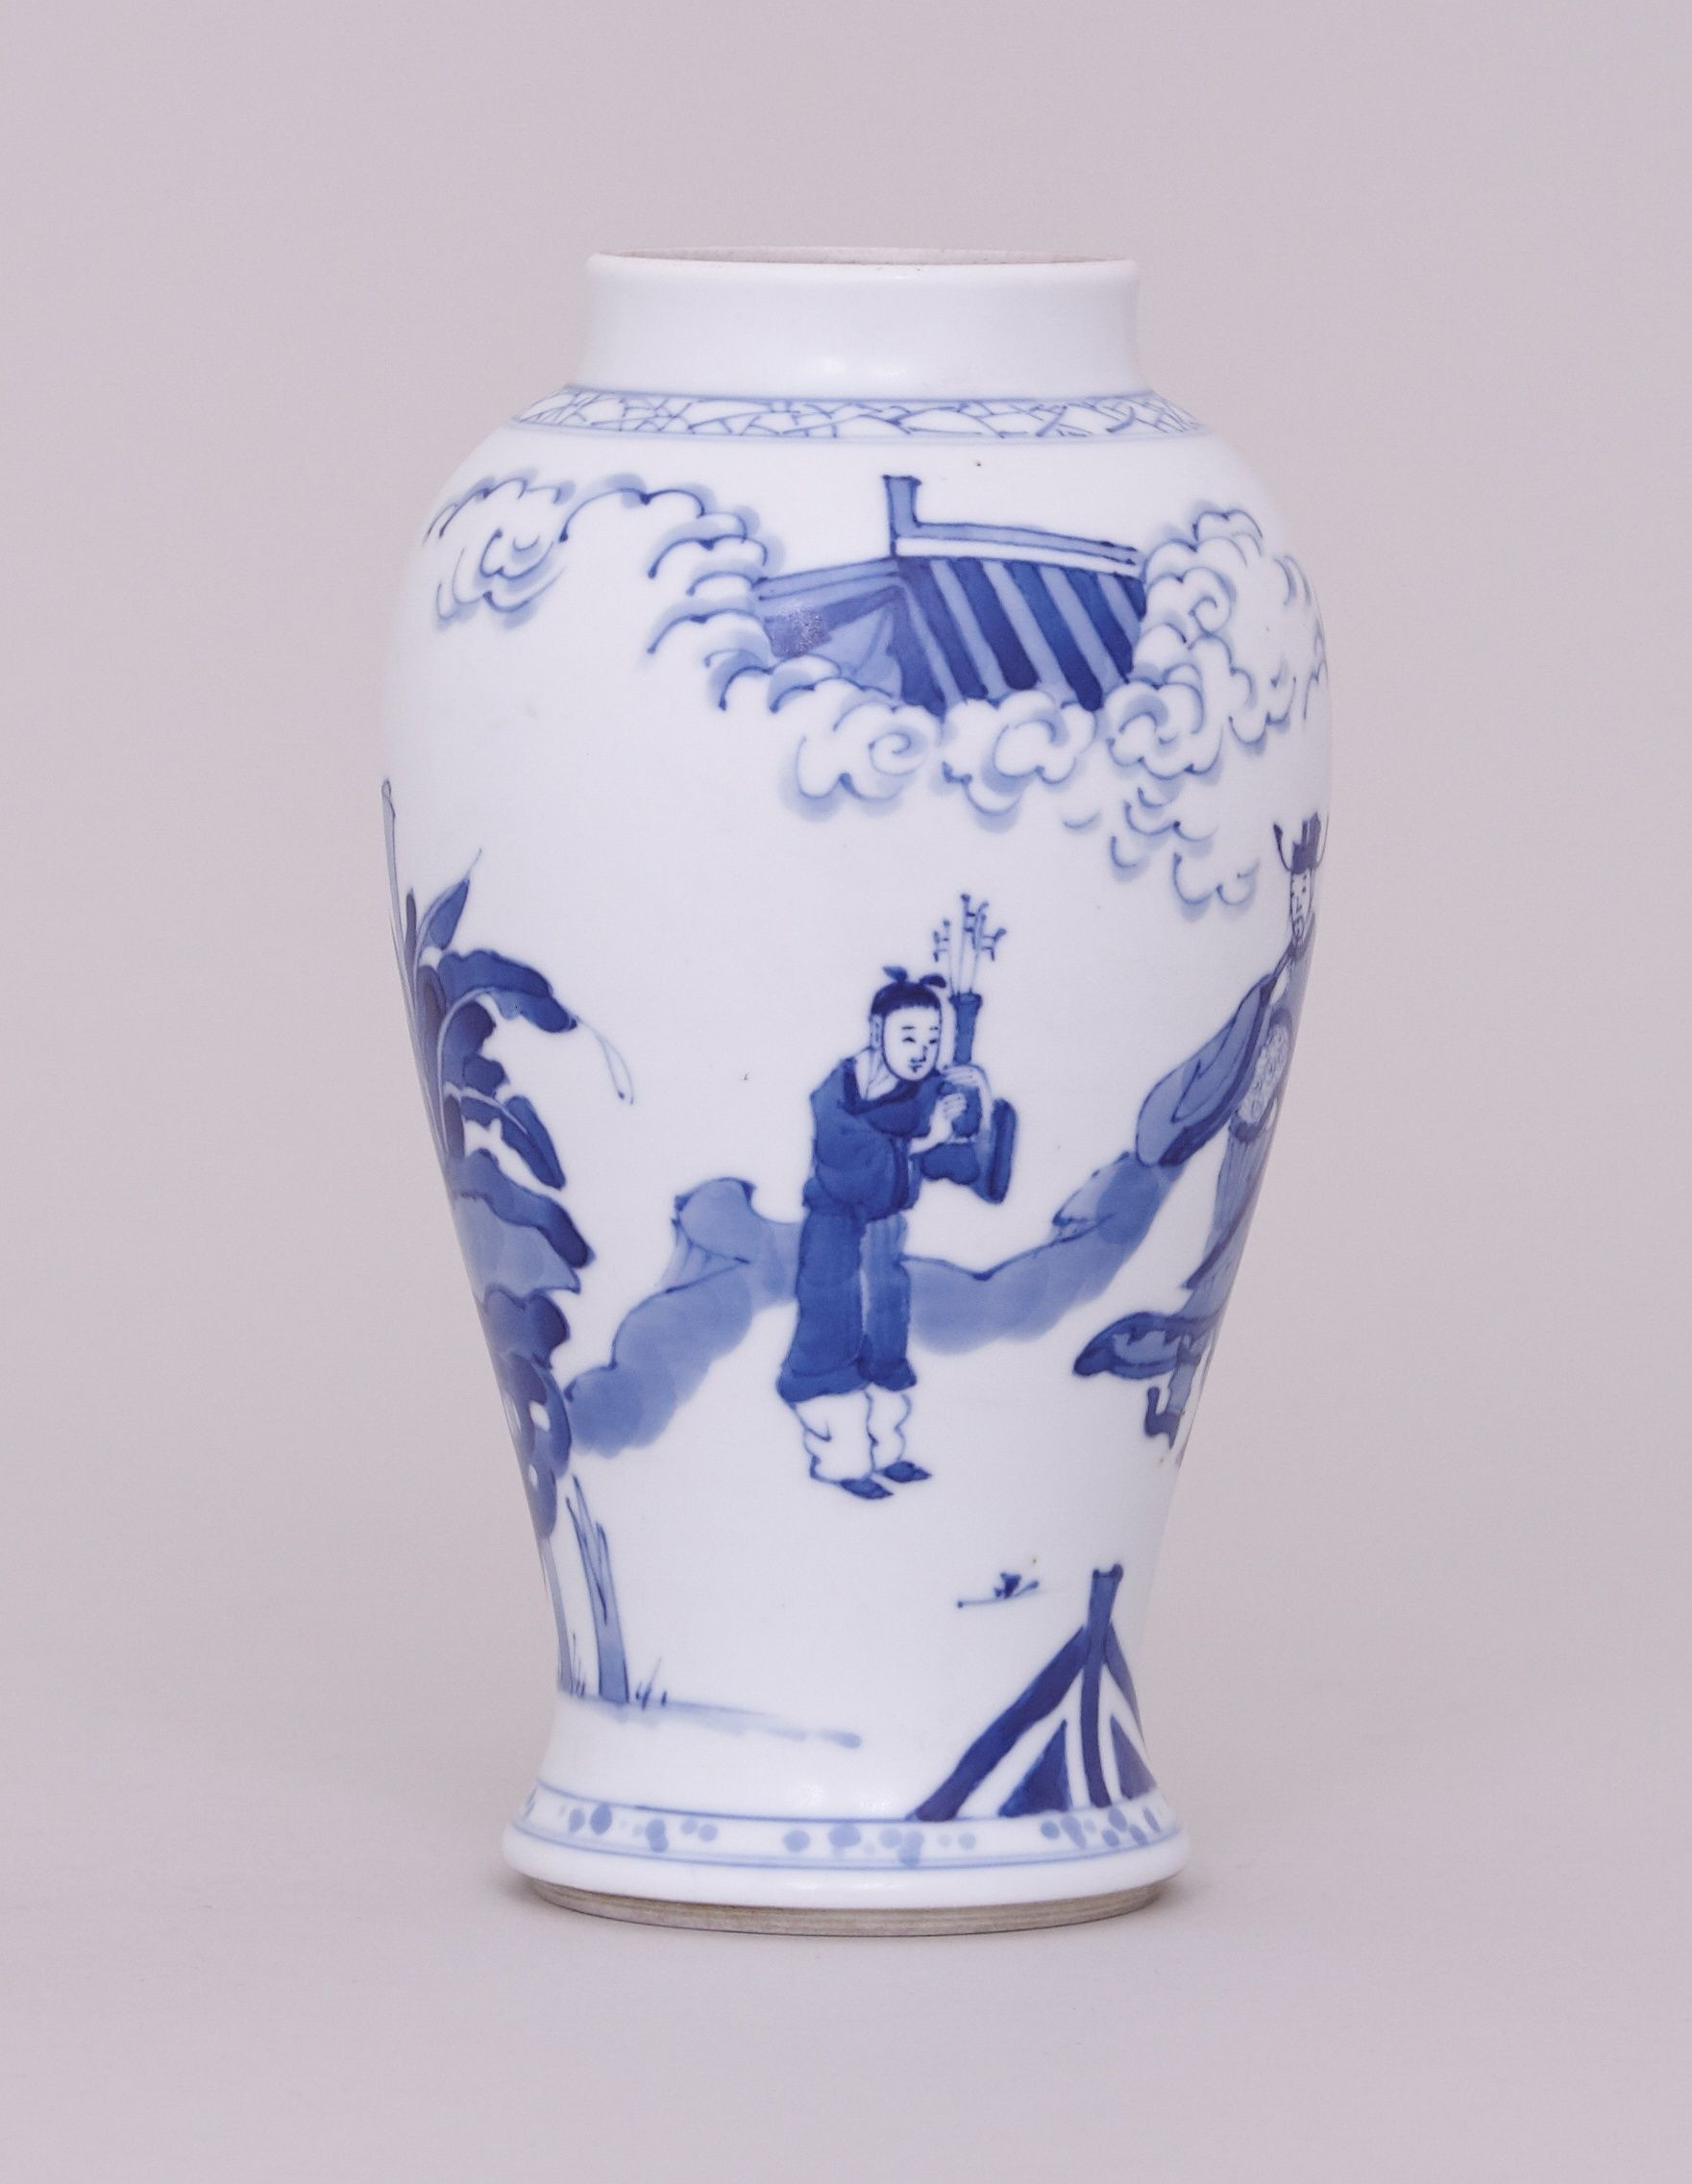 11 Fantastic Ancient Chinese Porcelain Vase 2024 free download ancient chinese porcelain vase of 32 wide mouth vase the weekly world for a chinese blue and white vase kangxi 1662 1722